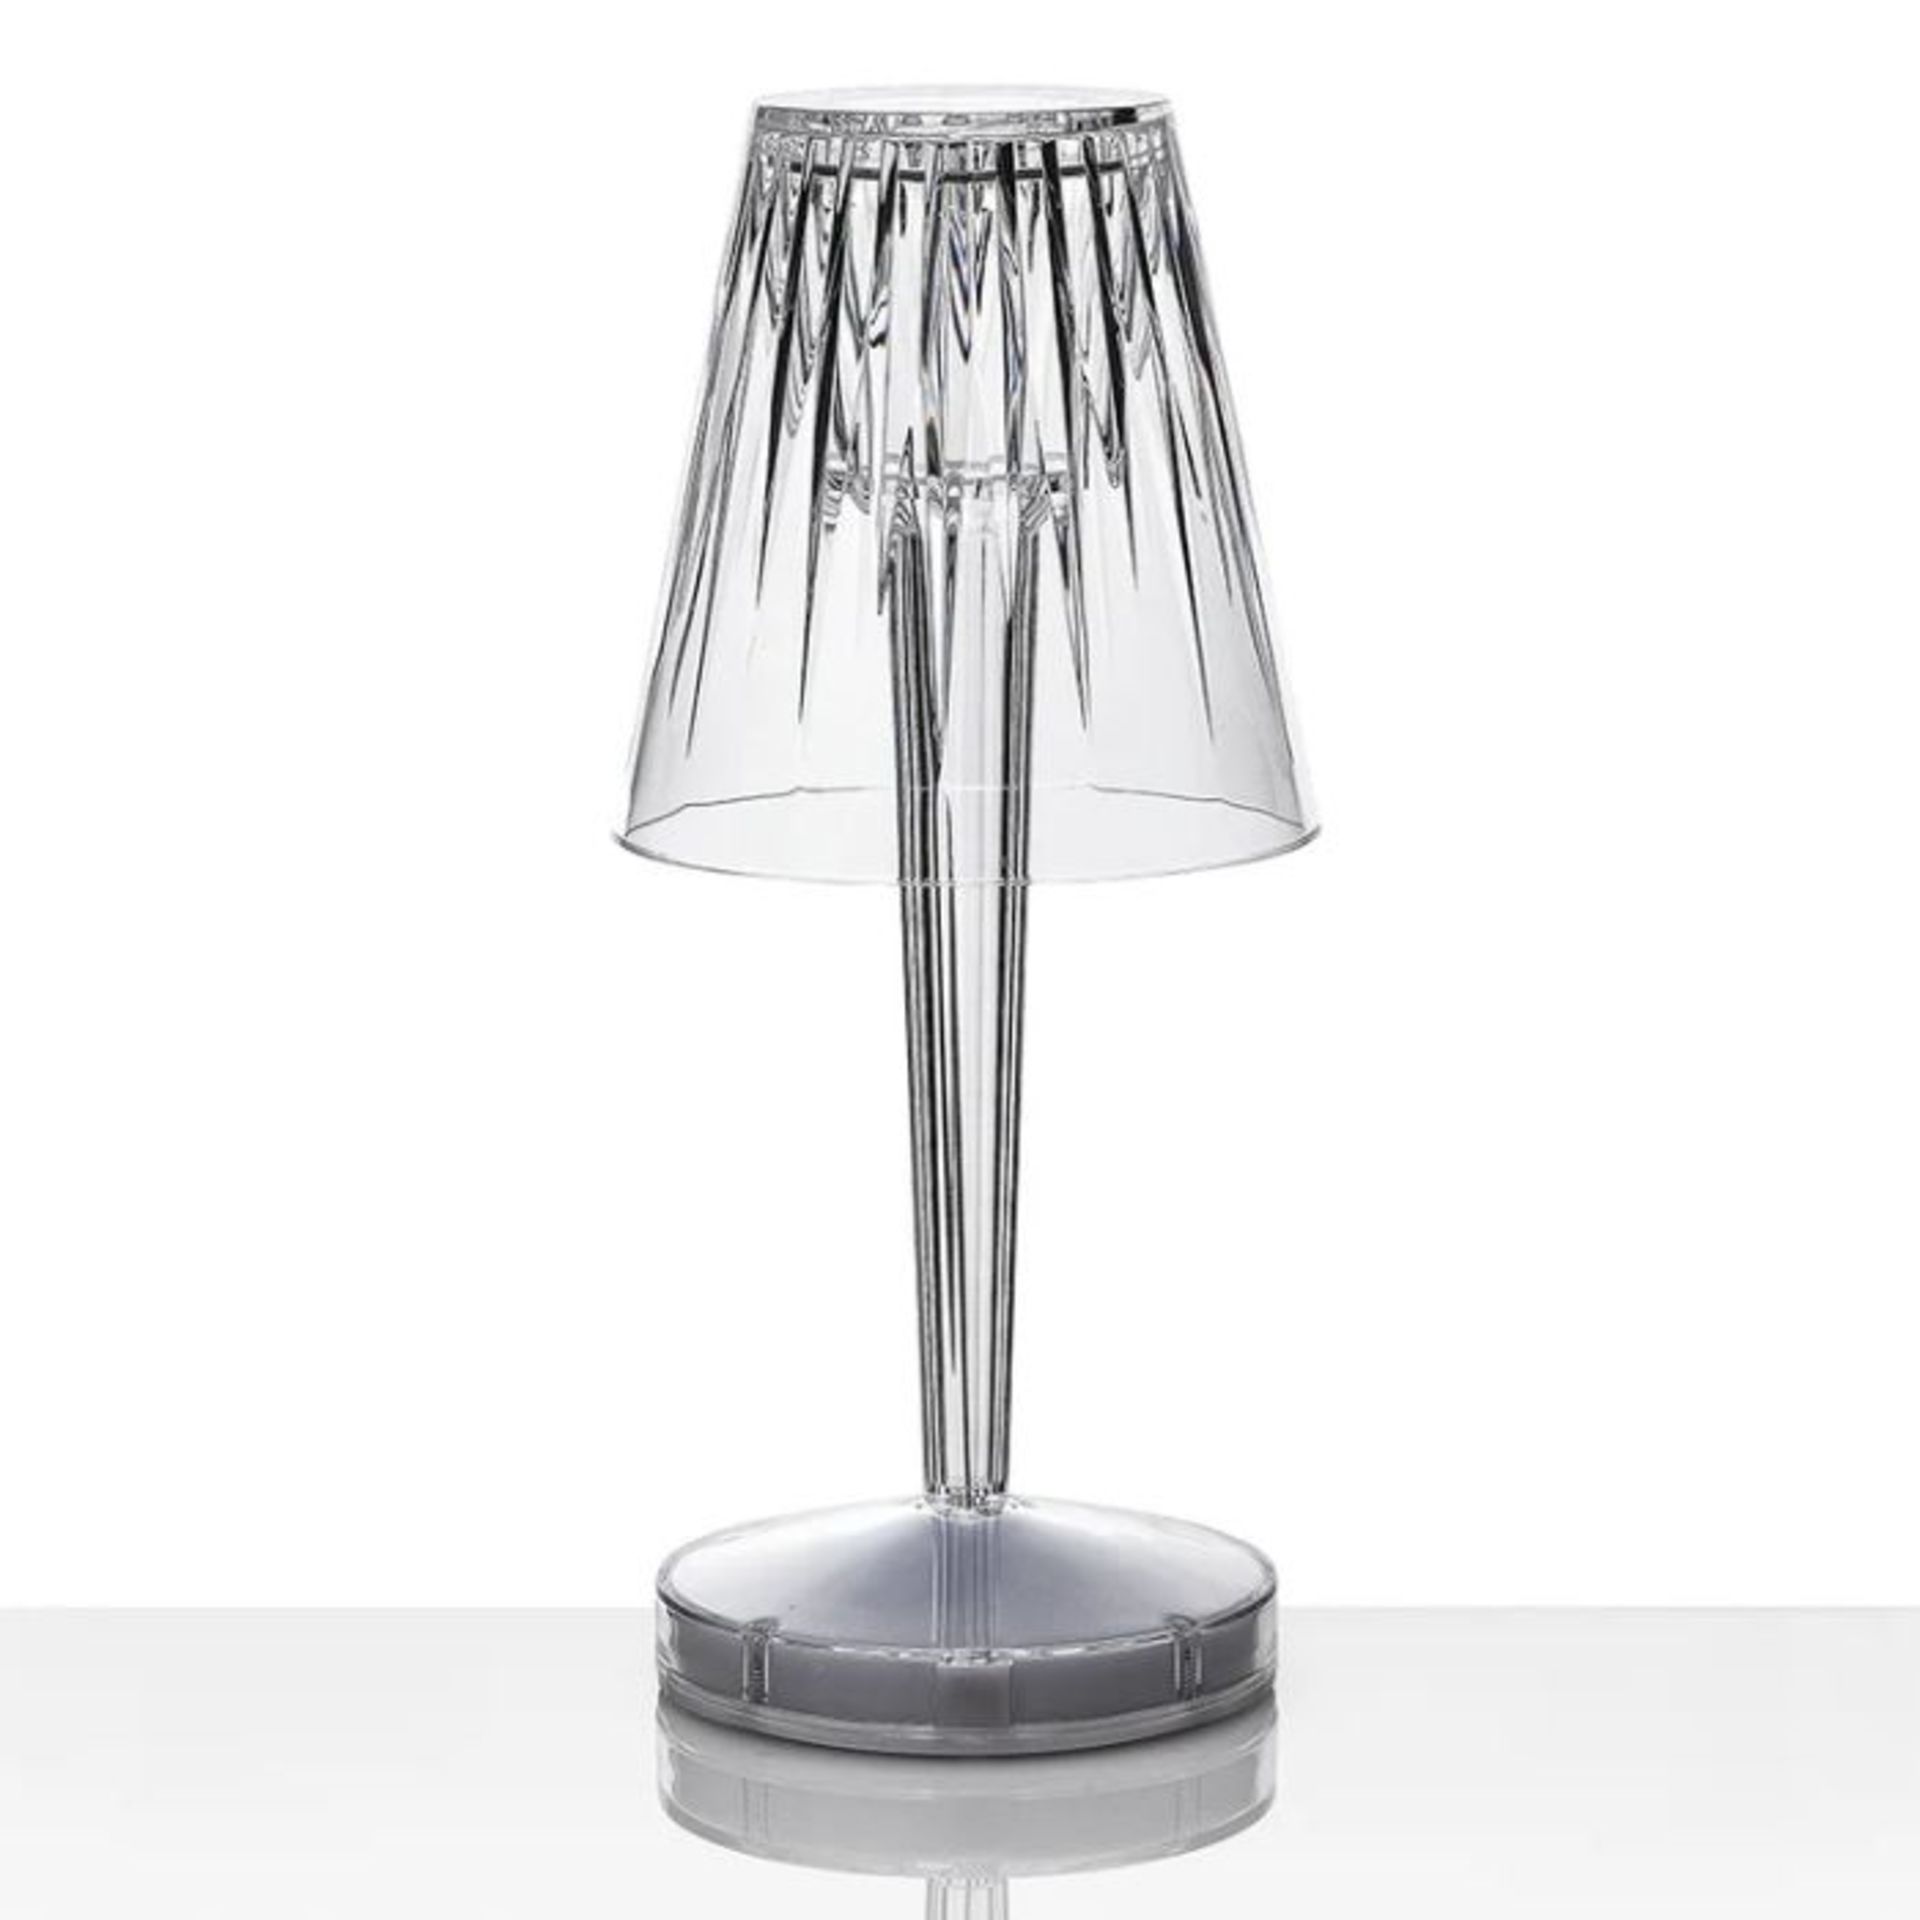 Canora Grey, Northrup 16cm Transparent Table Lamp With USB - RRP £159.99 (TMCC2774 - 29323/17)